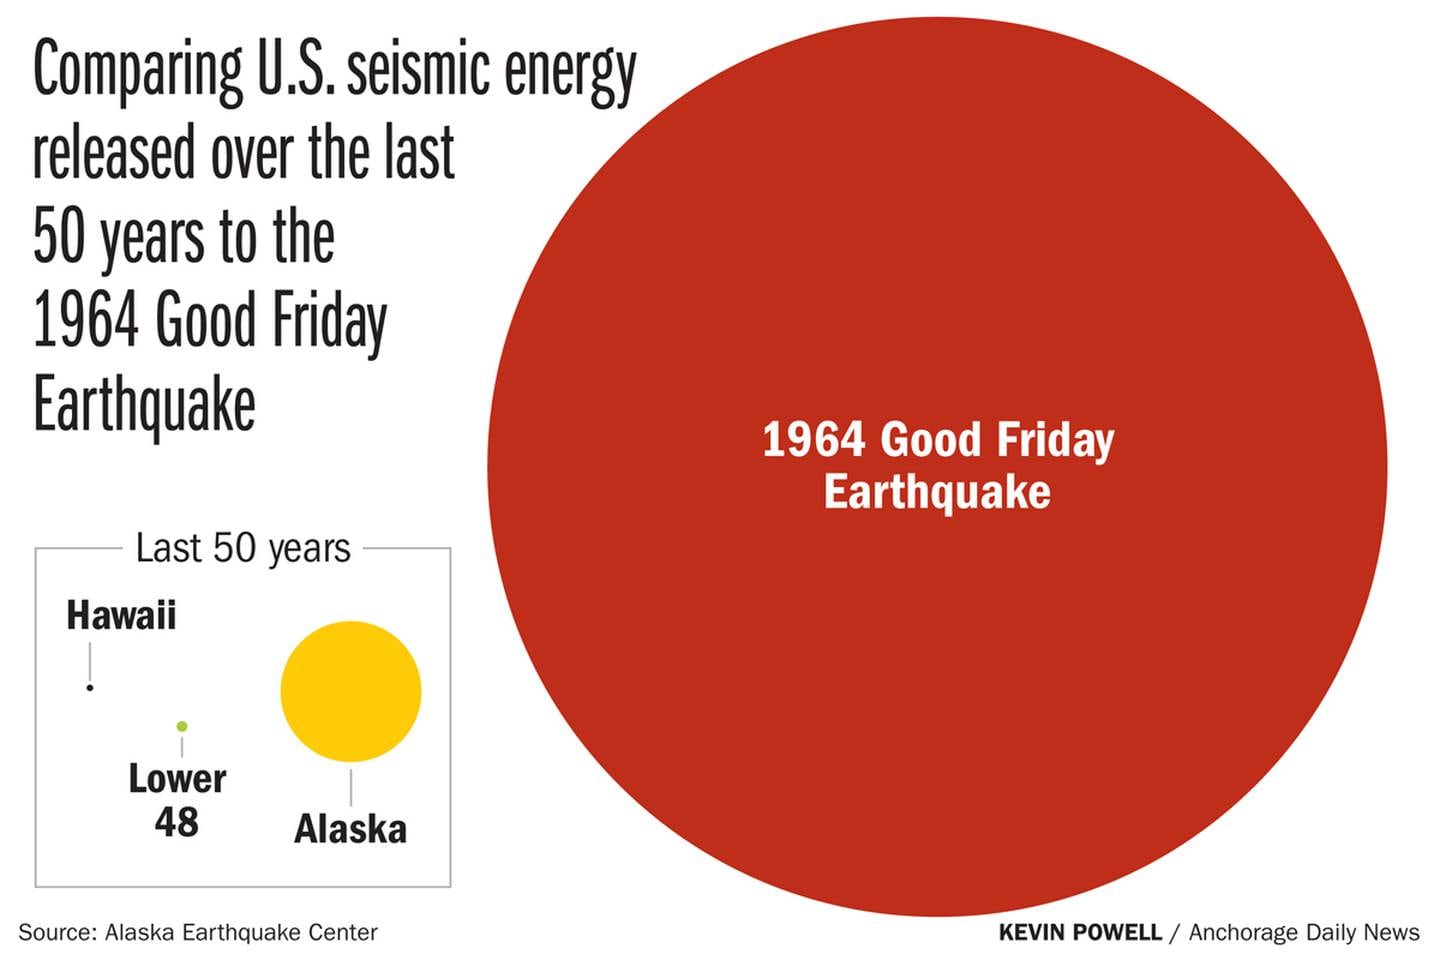 Comparing U.S. seismic energy released over the last 50 years to the 1964 Good Friday Earthquake